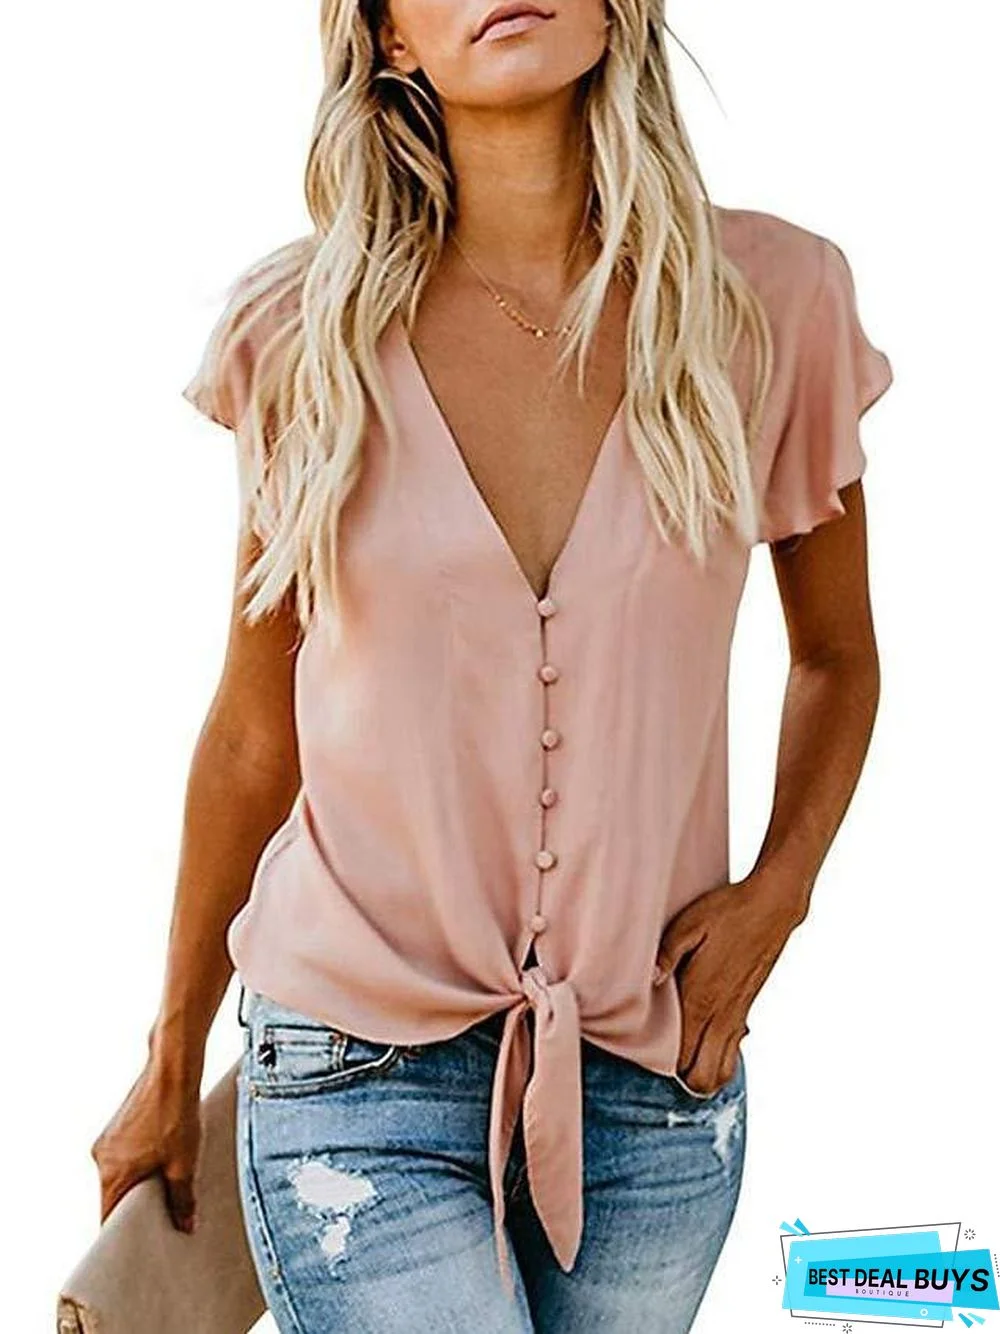 Women's Casual Stylish V Neck Button Down Floral Print Cuffed Sleeve Blouses Shirts Tops Pullover